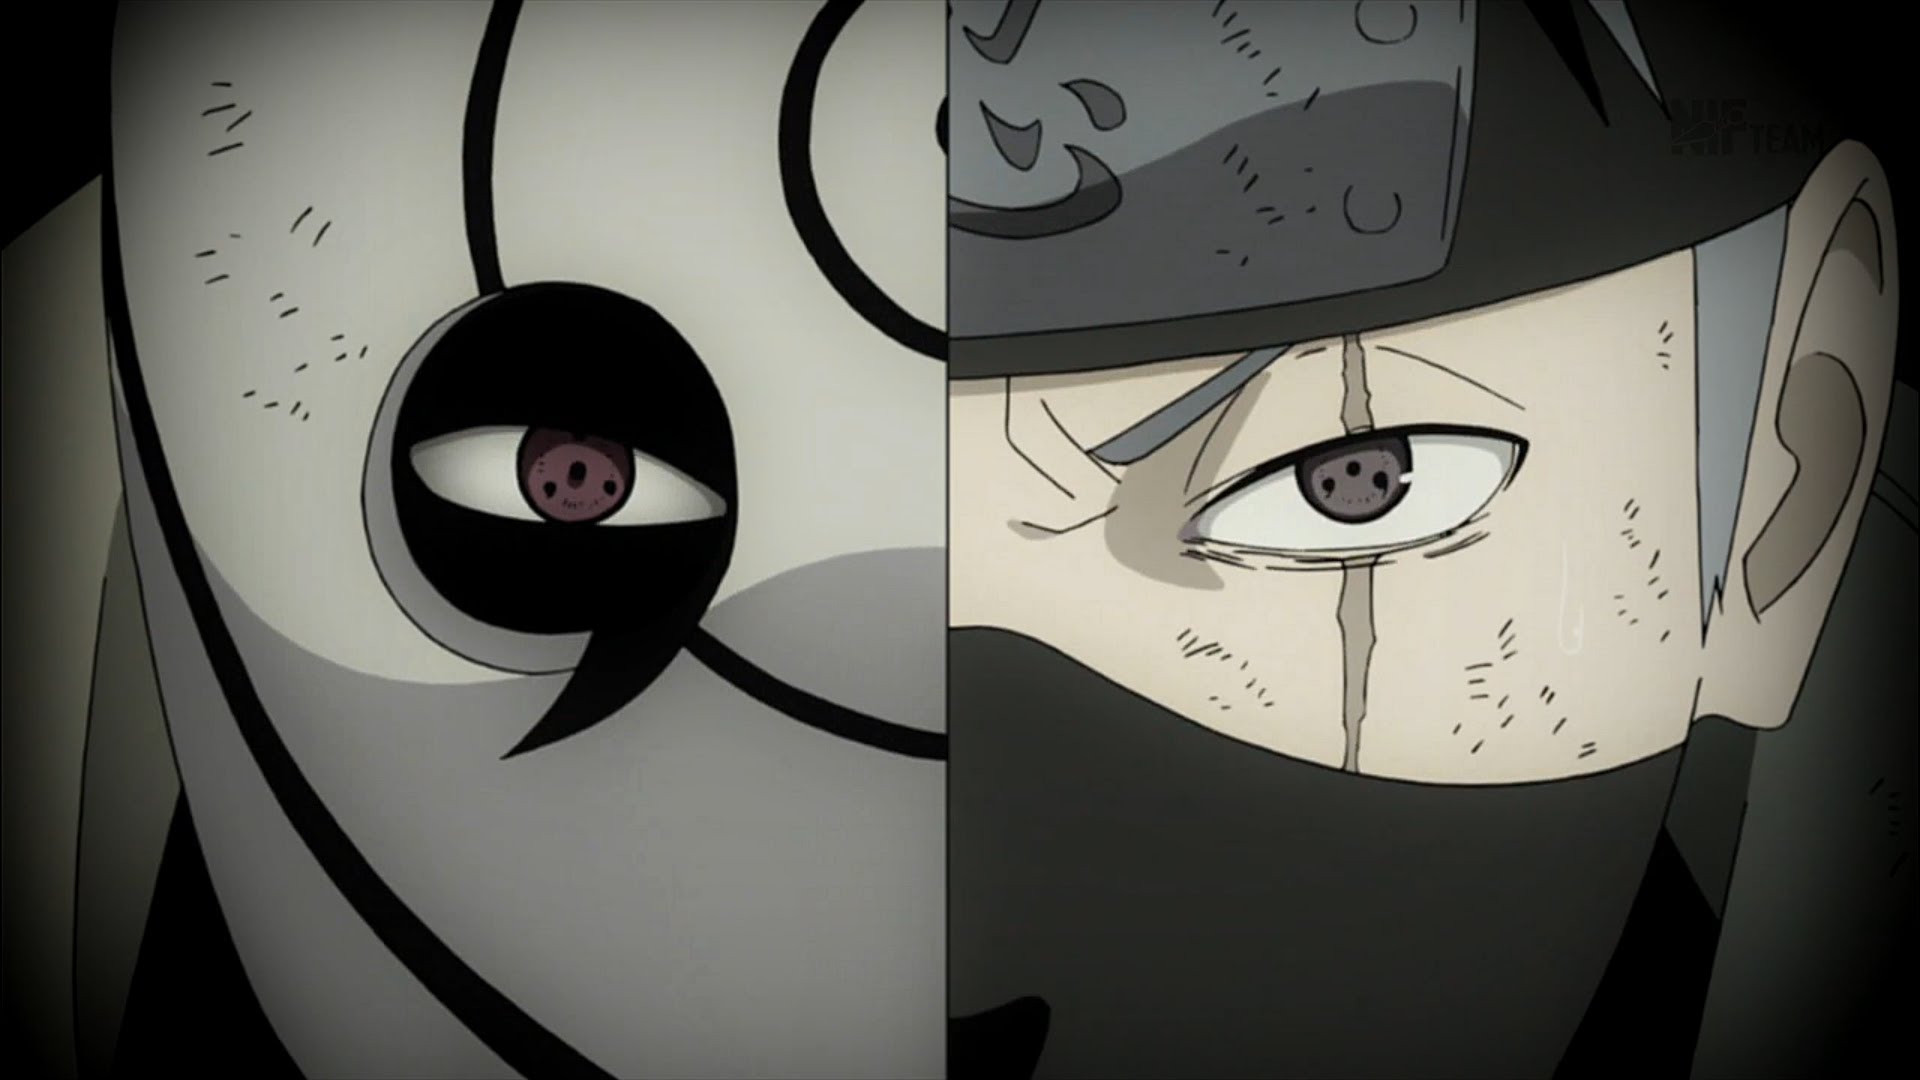 In any case, how did Kakashi handle to defeat Obito if he was stronger than him in Naruto Shippuden?